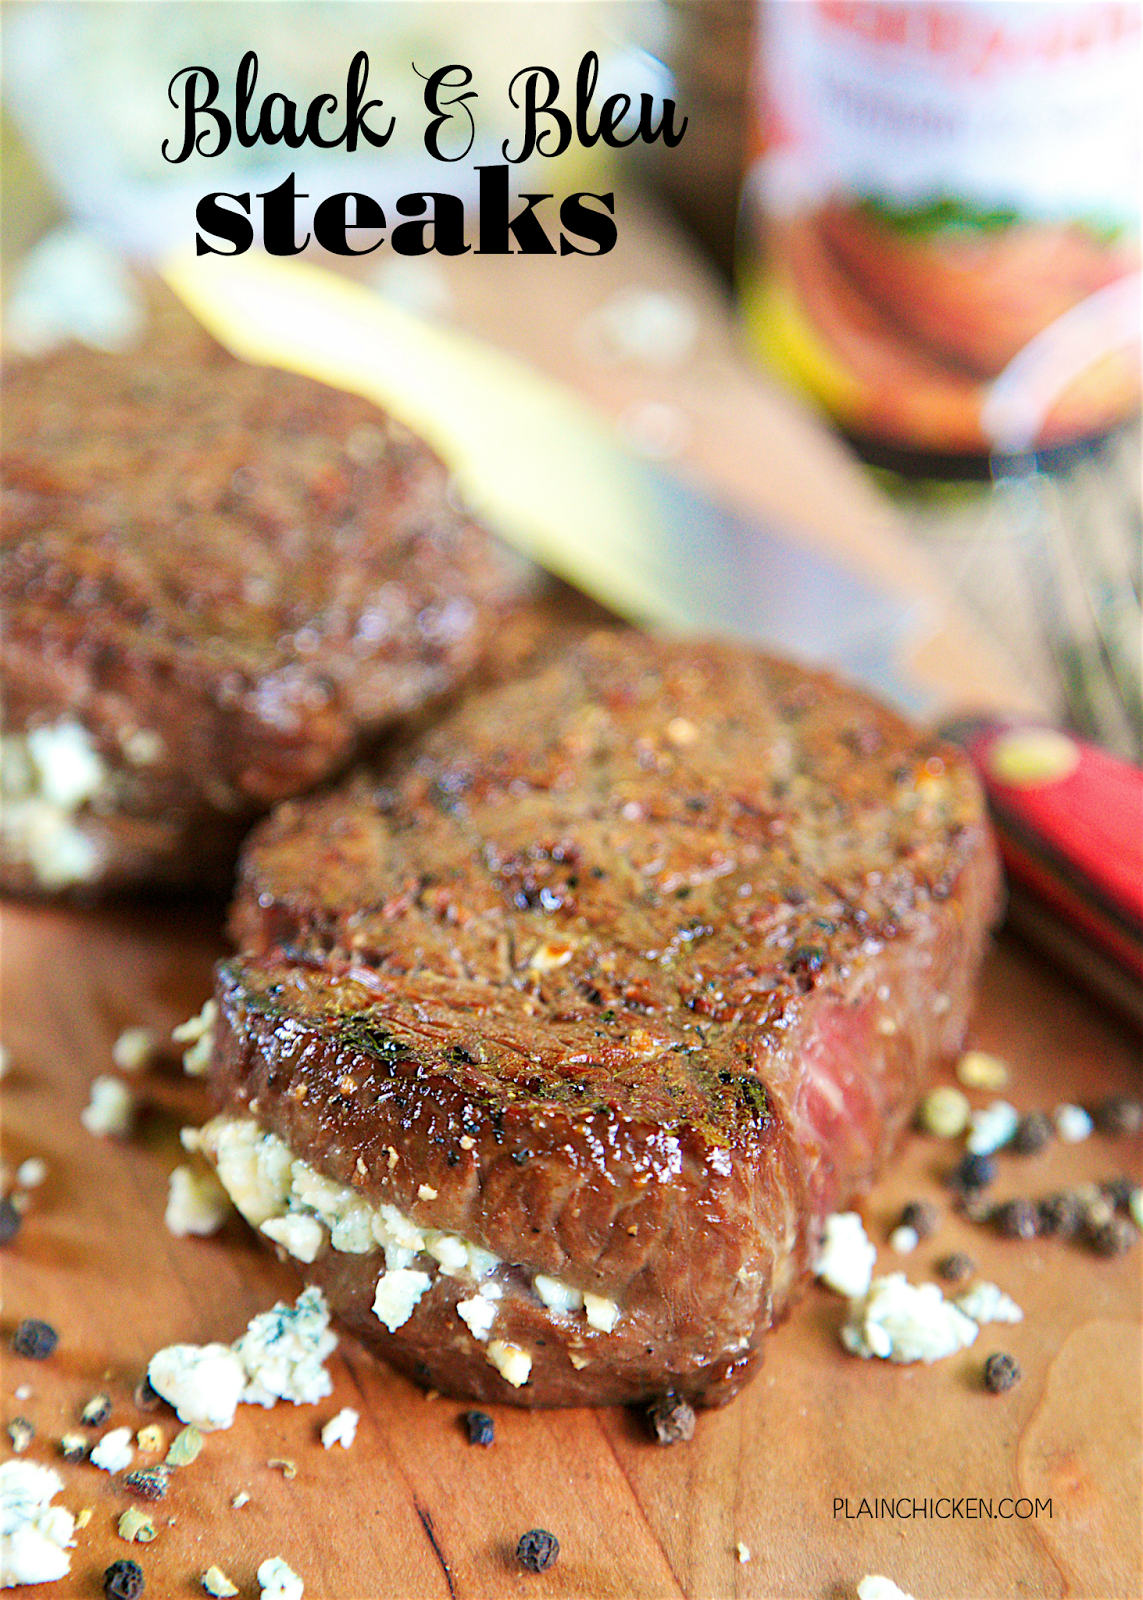 Black and Bleu Steaks - only 4 ingredients to the best steak you've ever eaten! Kikkoman Teriyaki Marinade & Sauce, Worcestershire sauce, black pepper and bleu cheese. Let the steaks marinate all day. Made these for a dinner party and everyone cleaned their plate. CRAZY good! Better than any steakhouse!